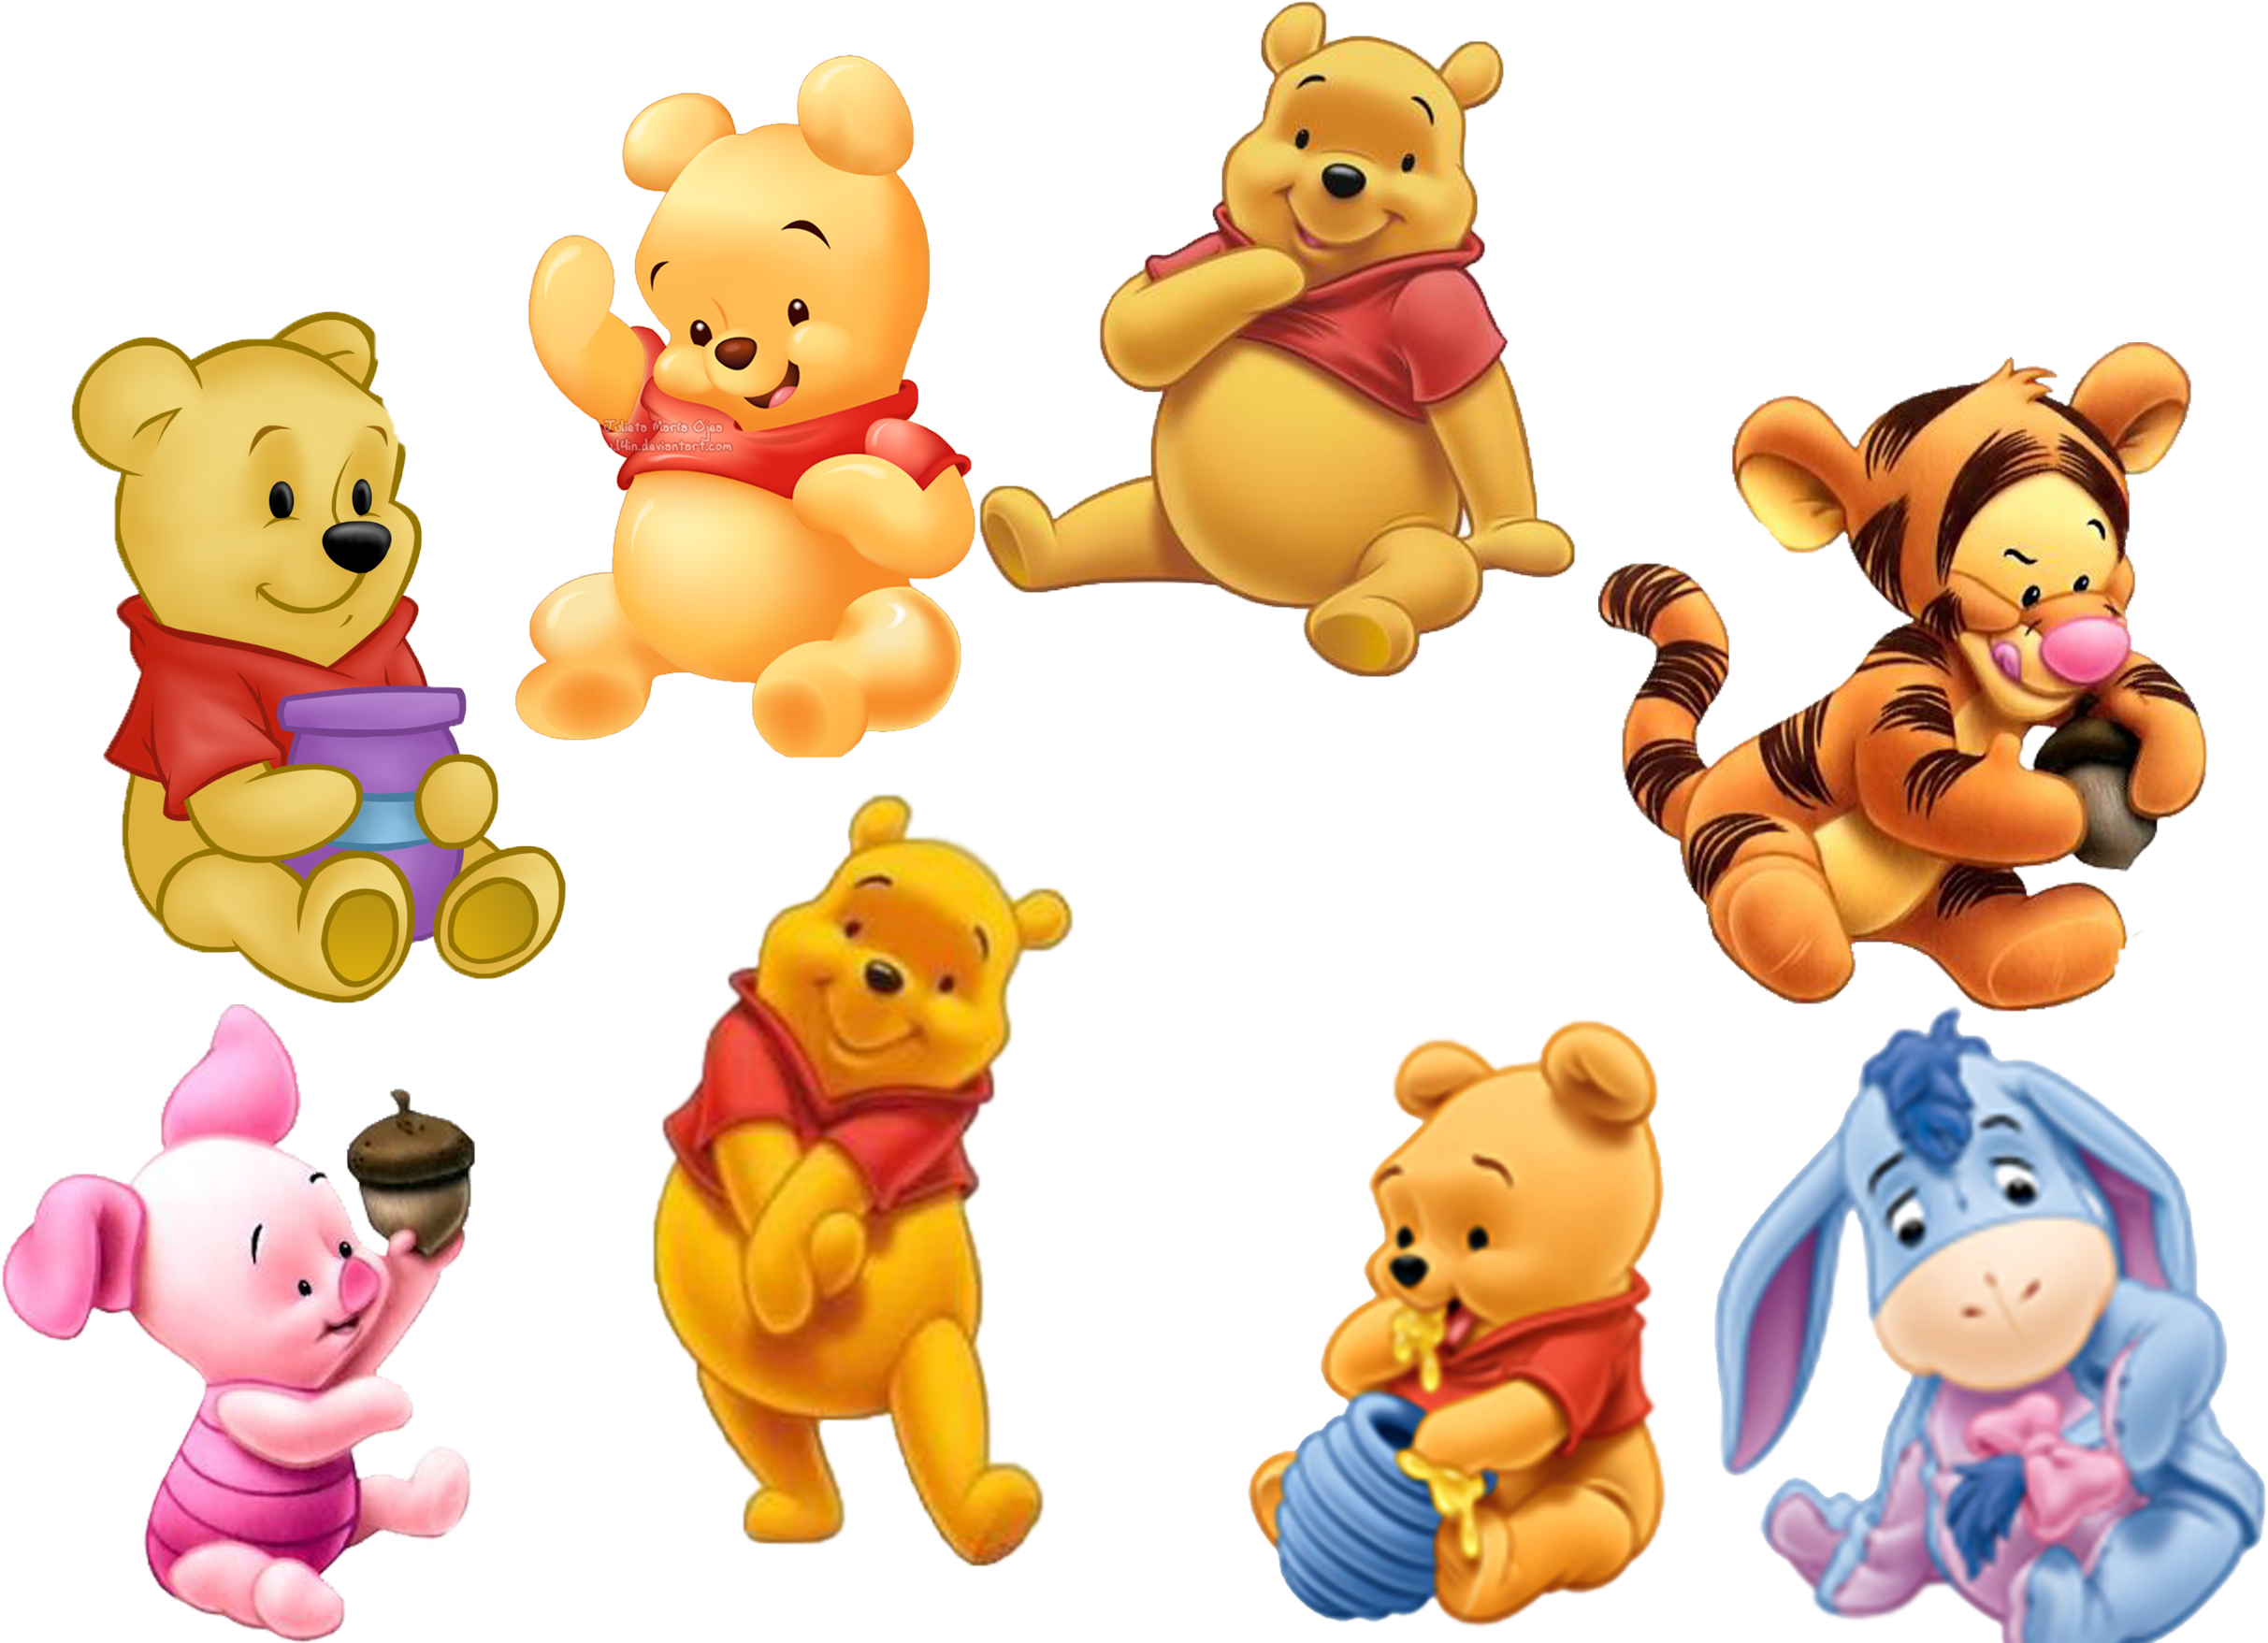 Juegos Winnie The Pooh - Winnie The Pooh And Friends Baby (2480x1795)